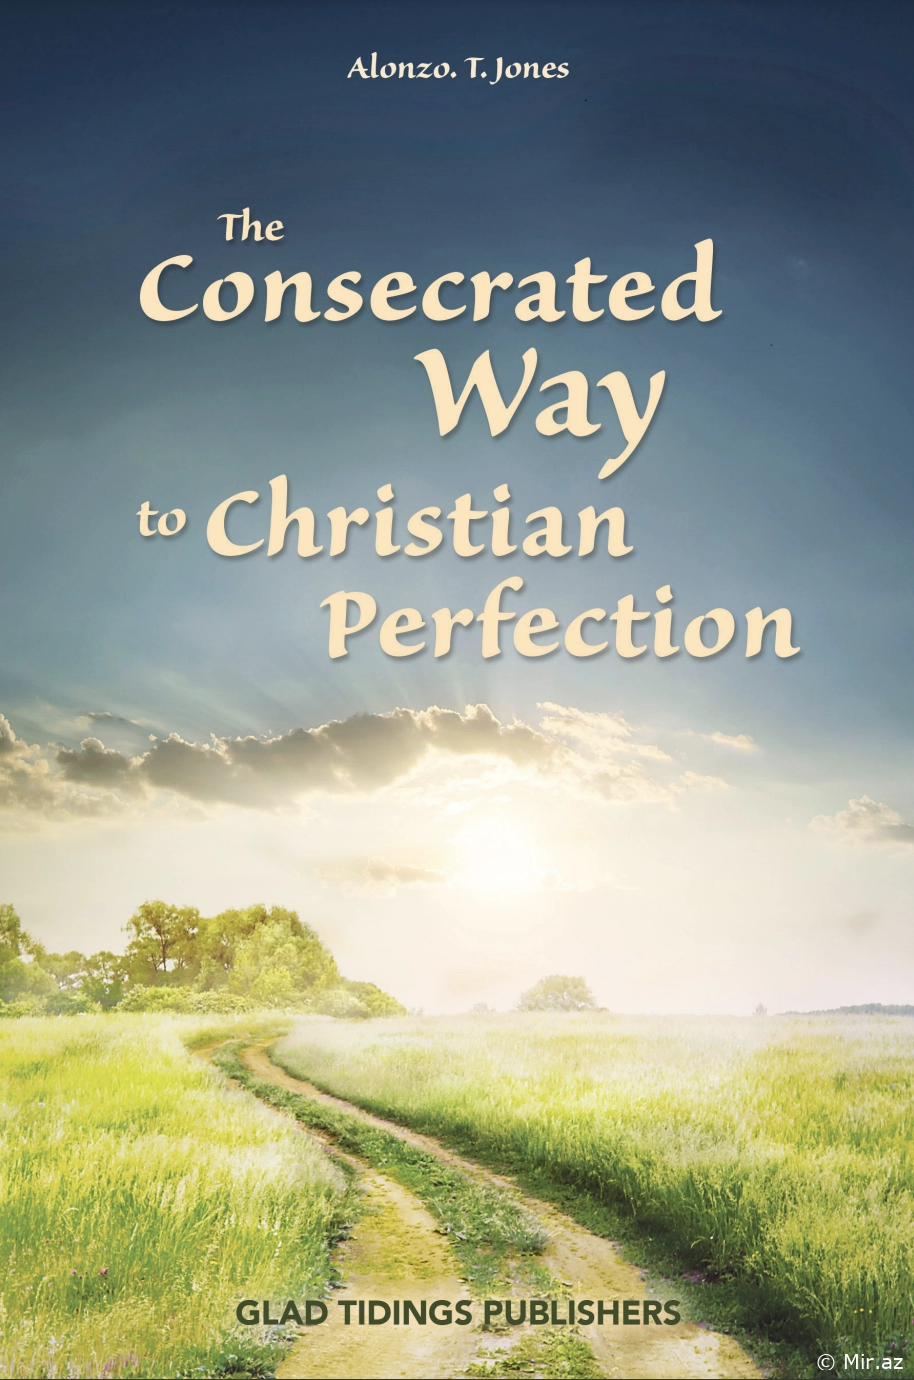 Alonzo T. Jones "The Consecrated Way to Christian Perfection" PDF